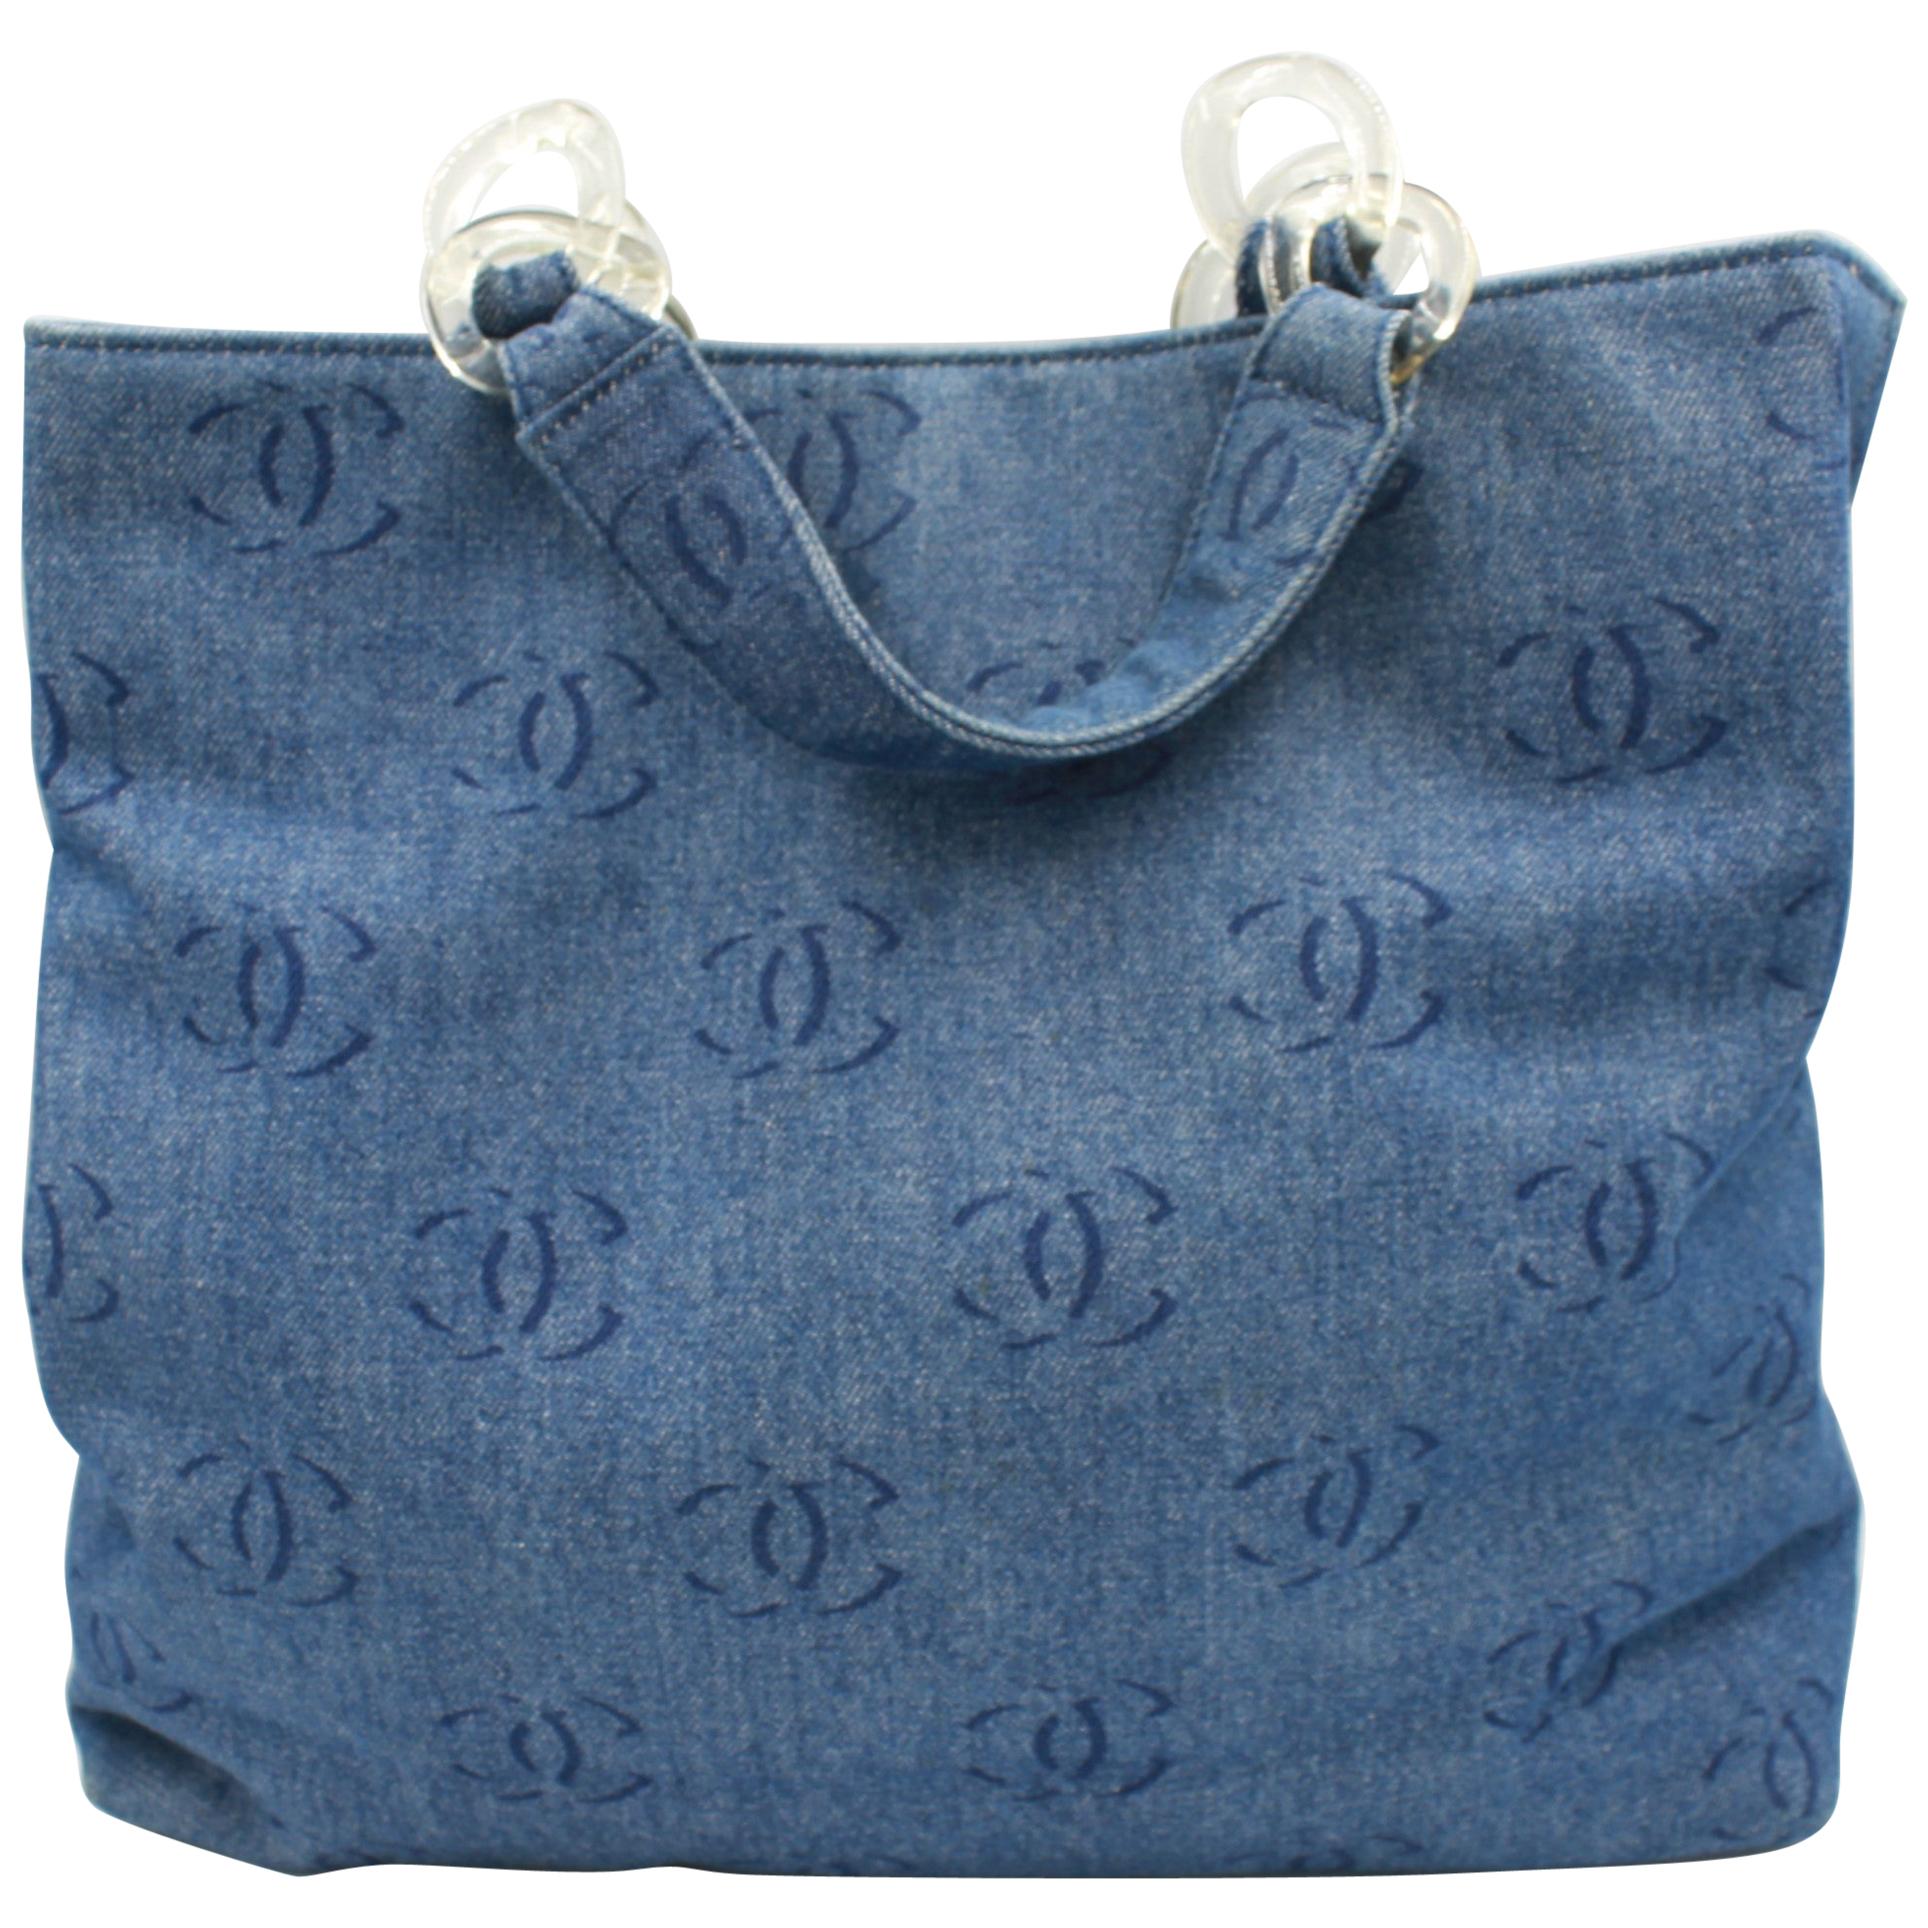 Chanel handbag in denim with double « C » print. For Sale